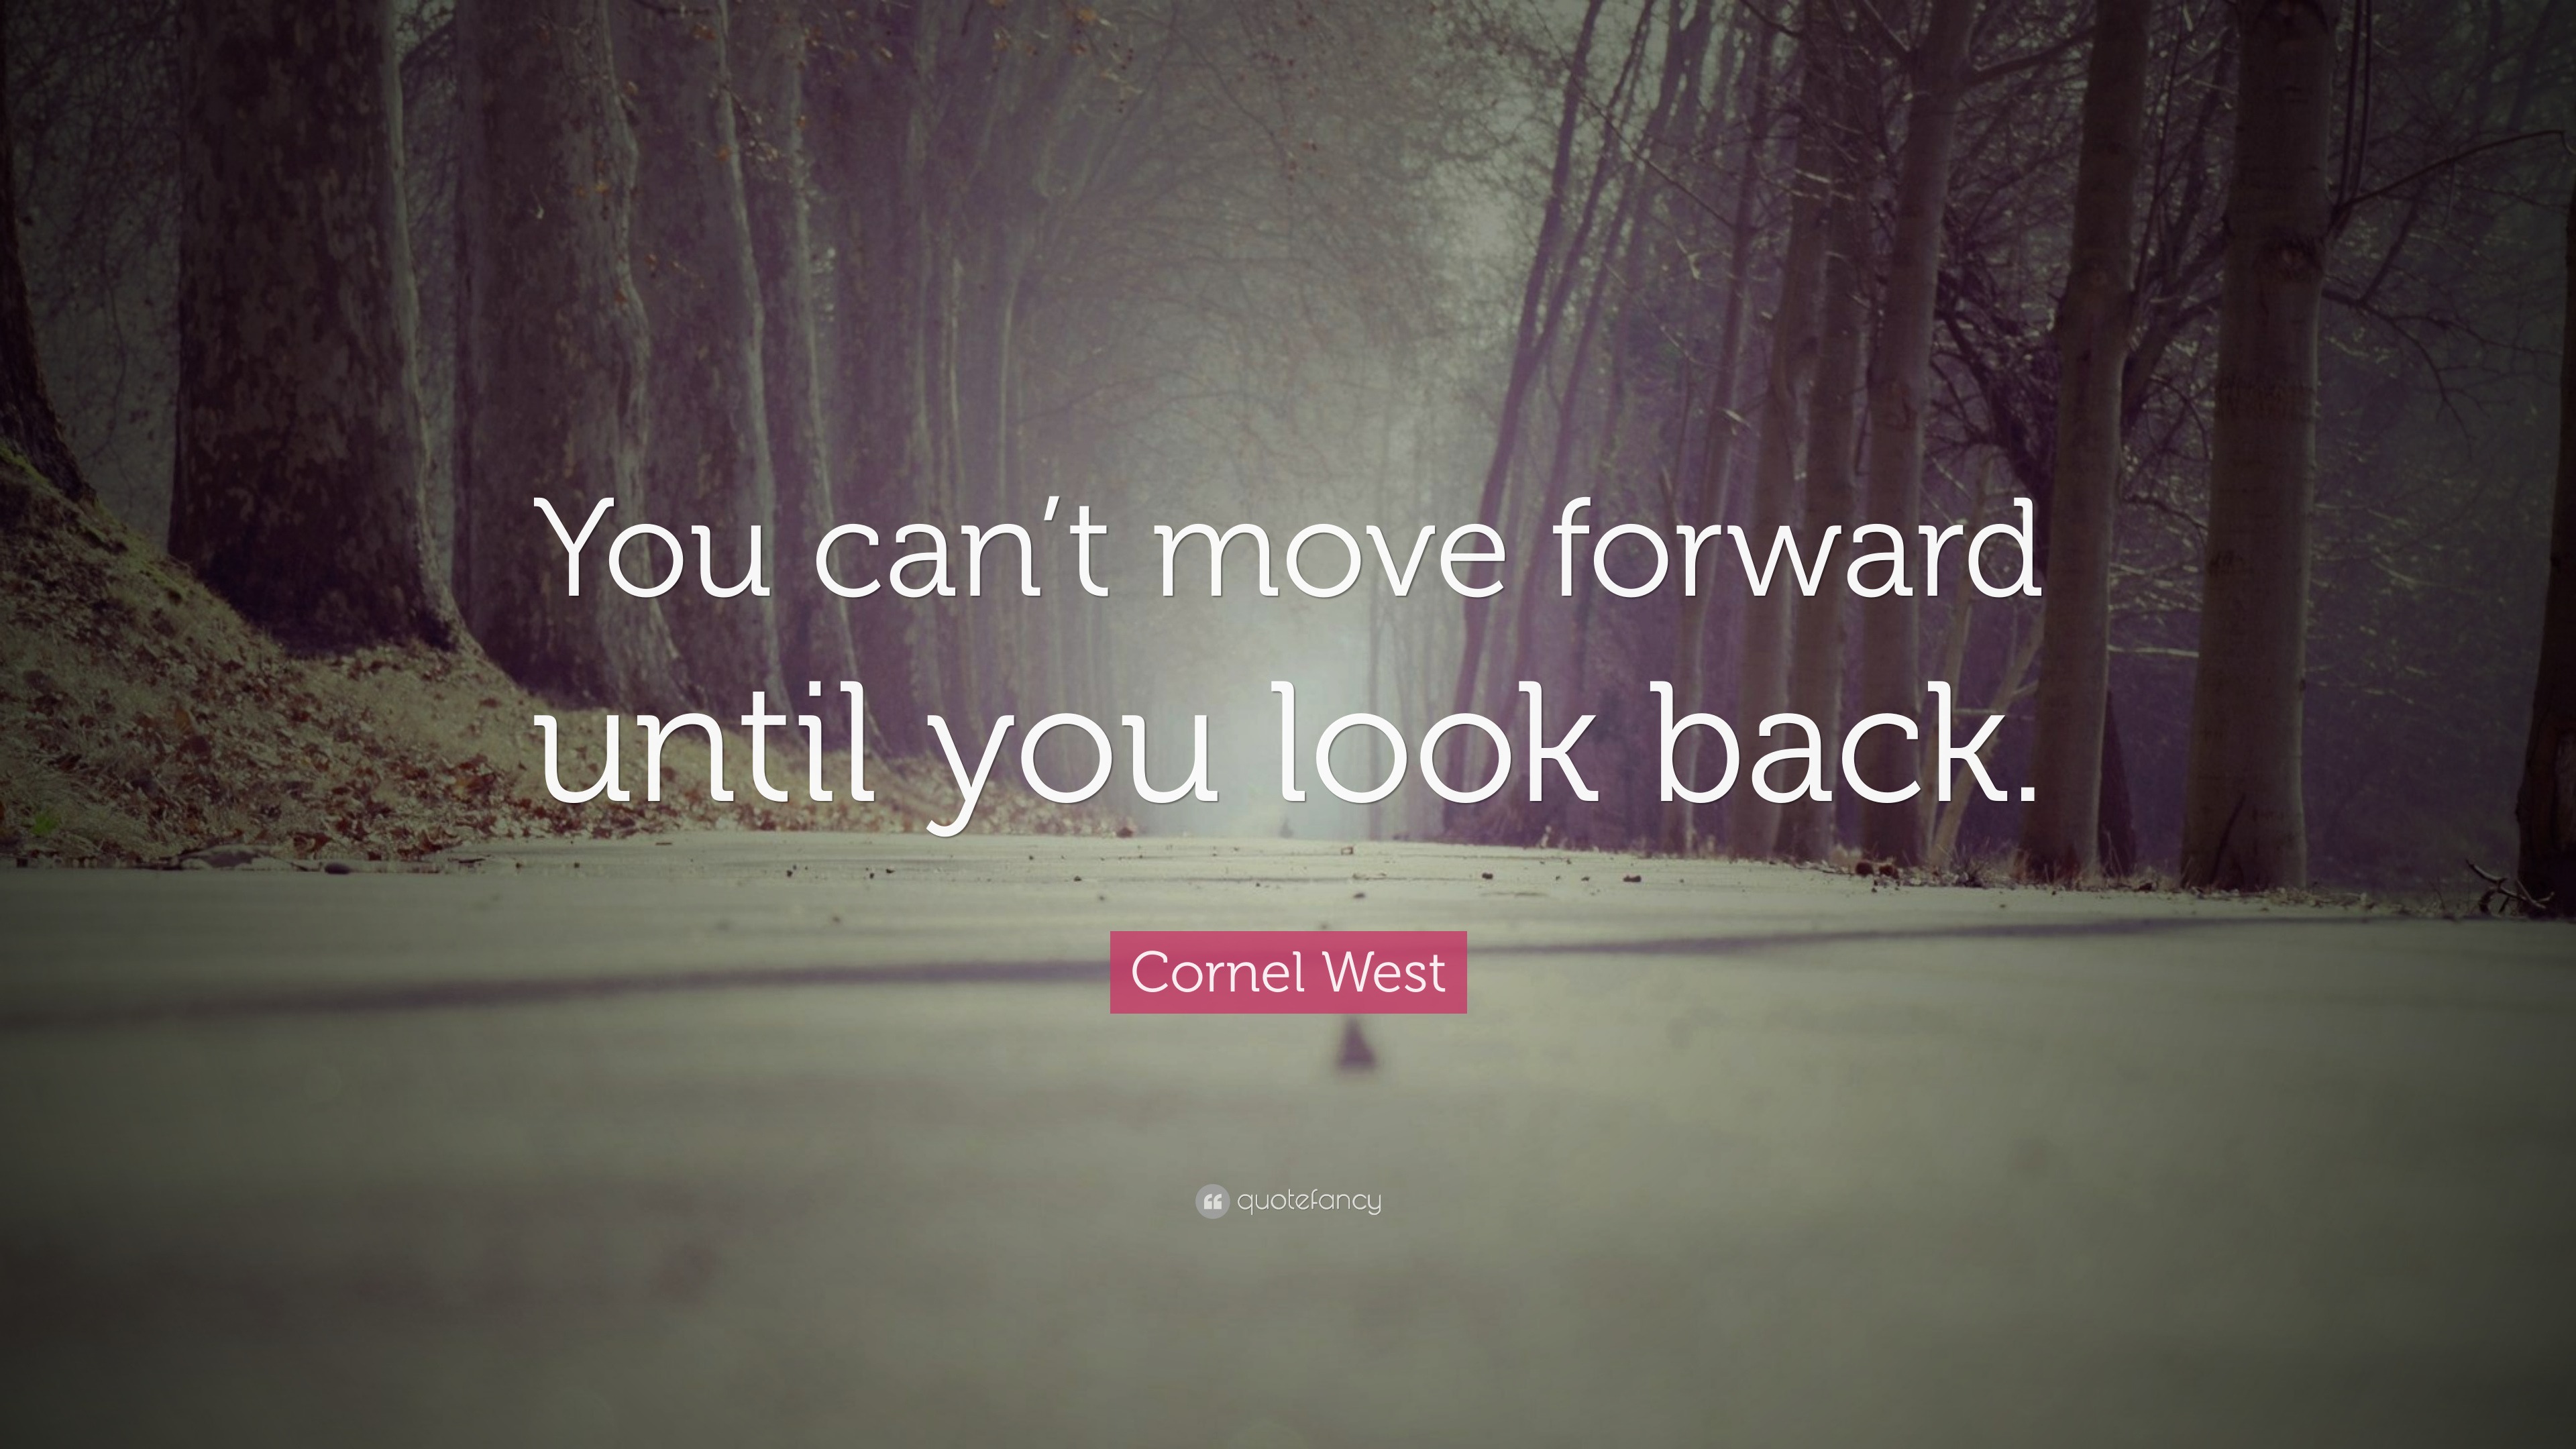 Cornel West Quote: “You can’t move forward until you look back.”